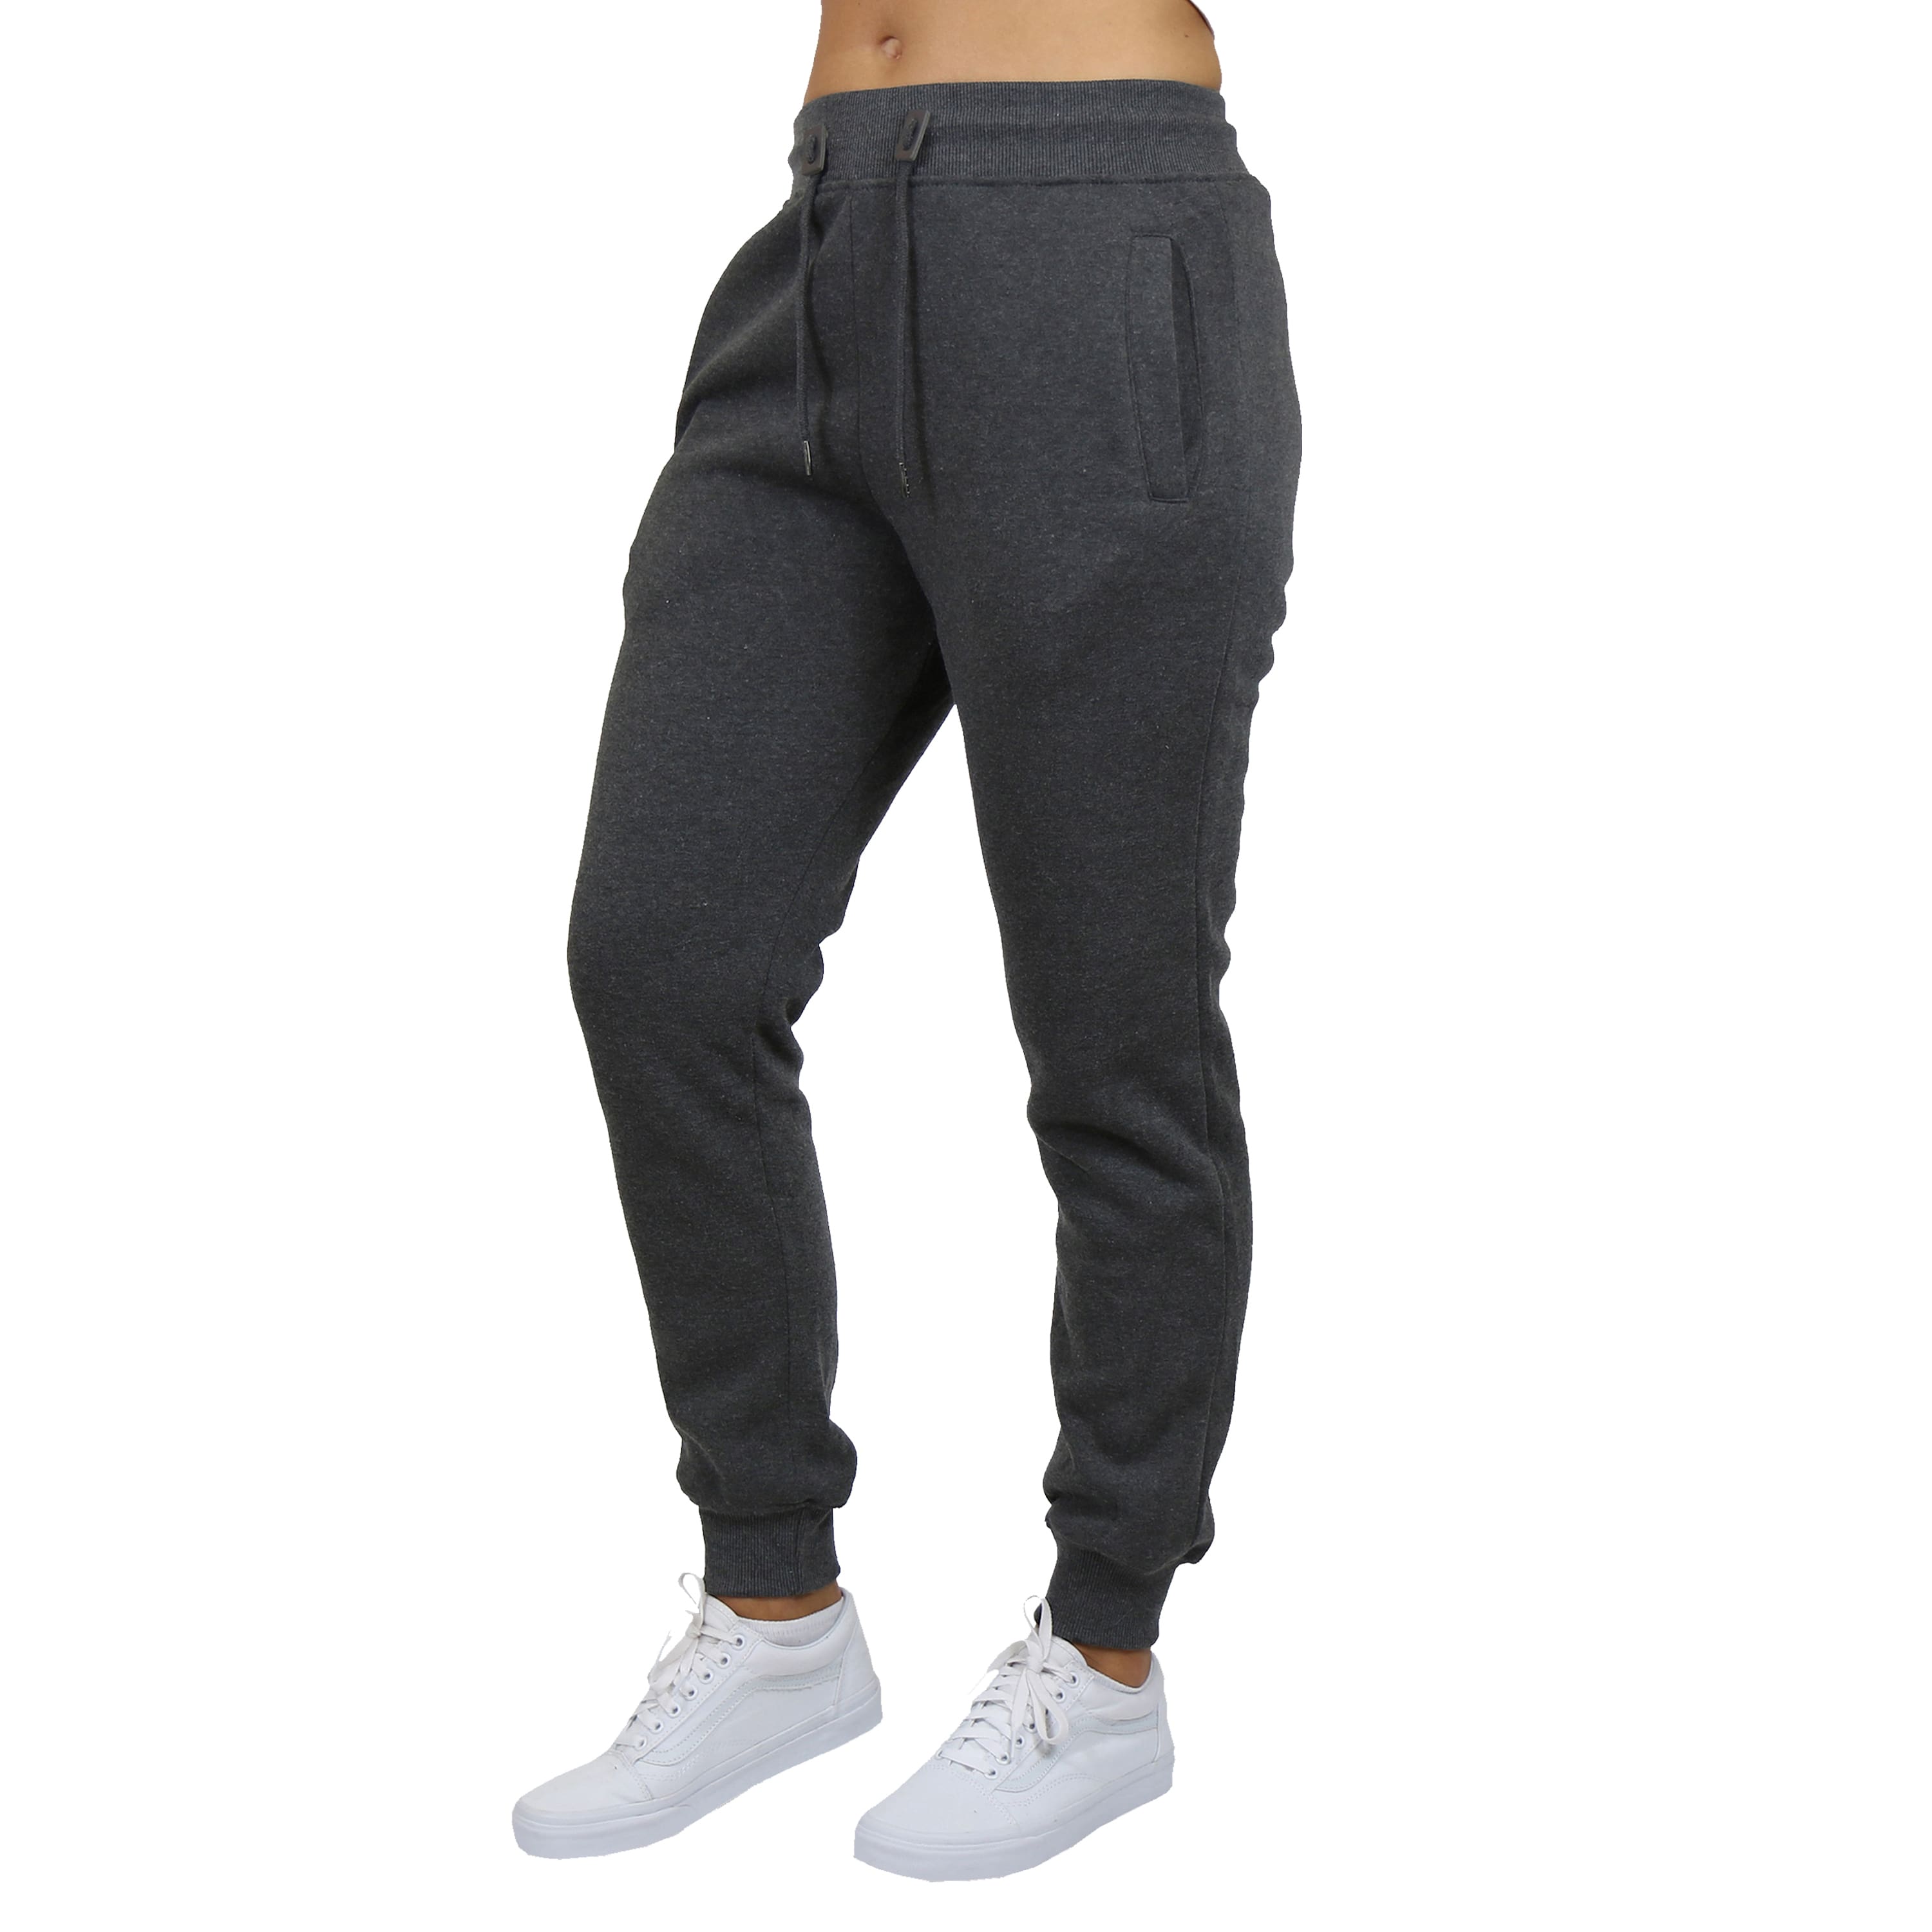 Buy in Bulk - Galaxy by Harvic Women's Relaxed-Fit Fleece-Lined Jogger ...